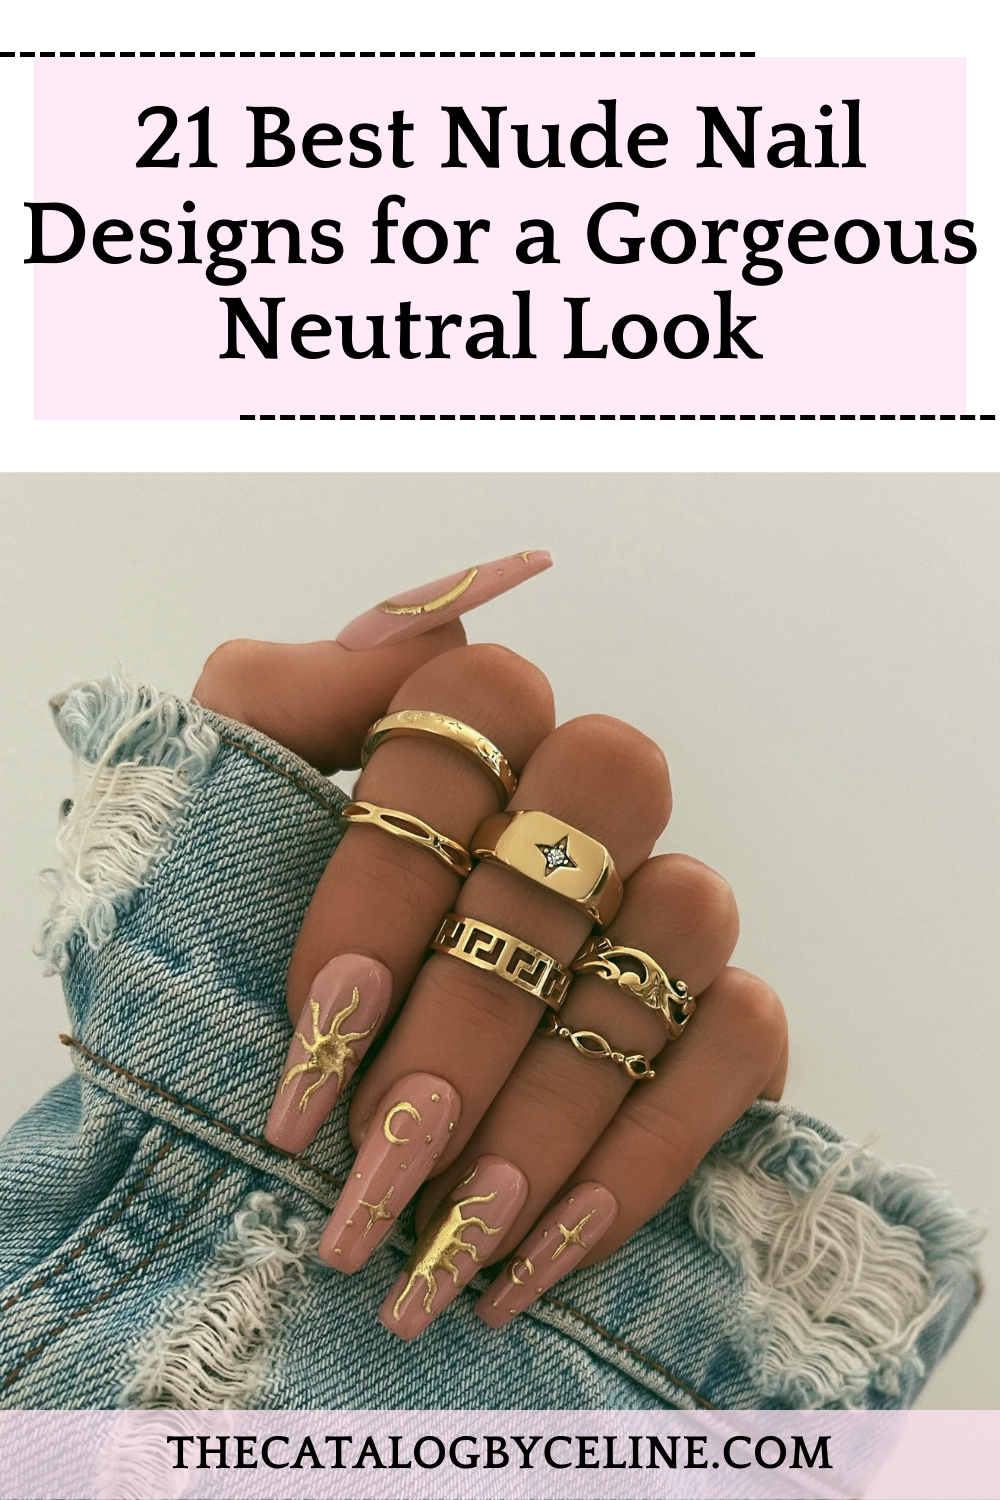 The Best Nude Nail Designs for a Gorgeous Neutral Look